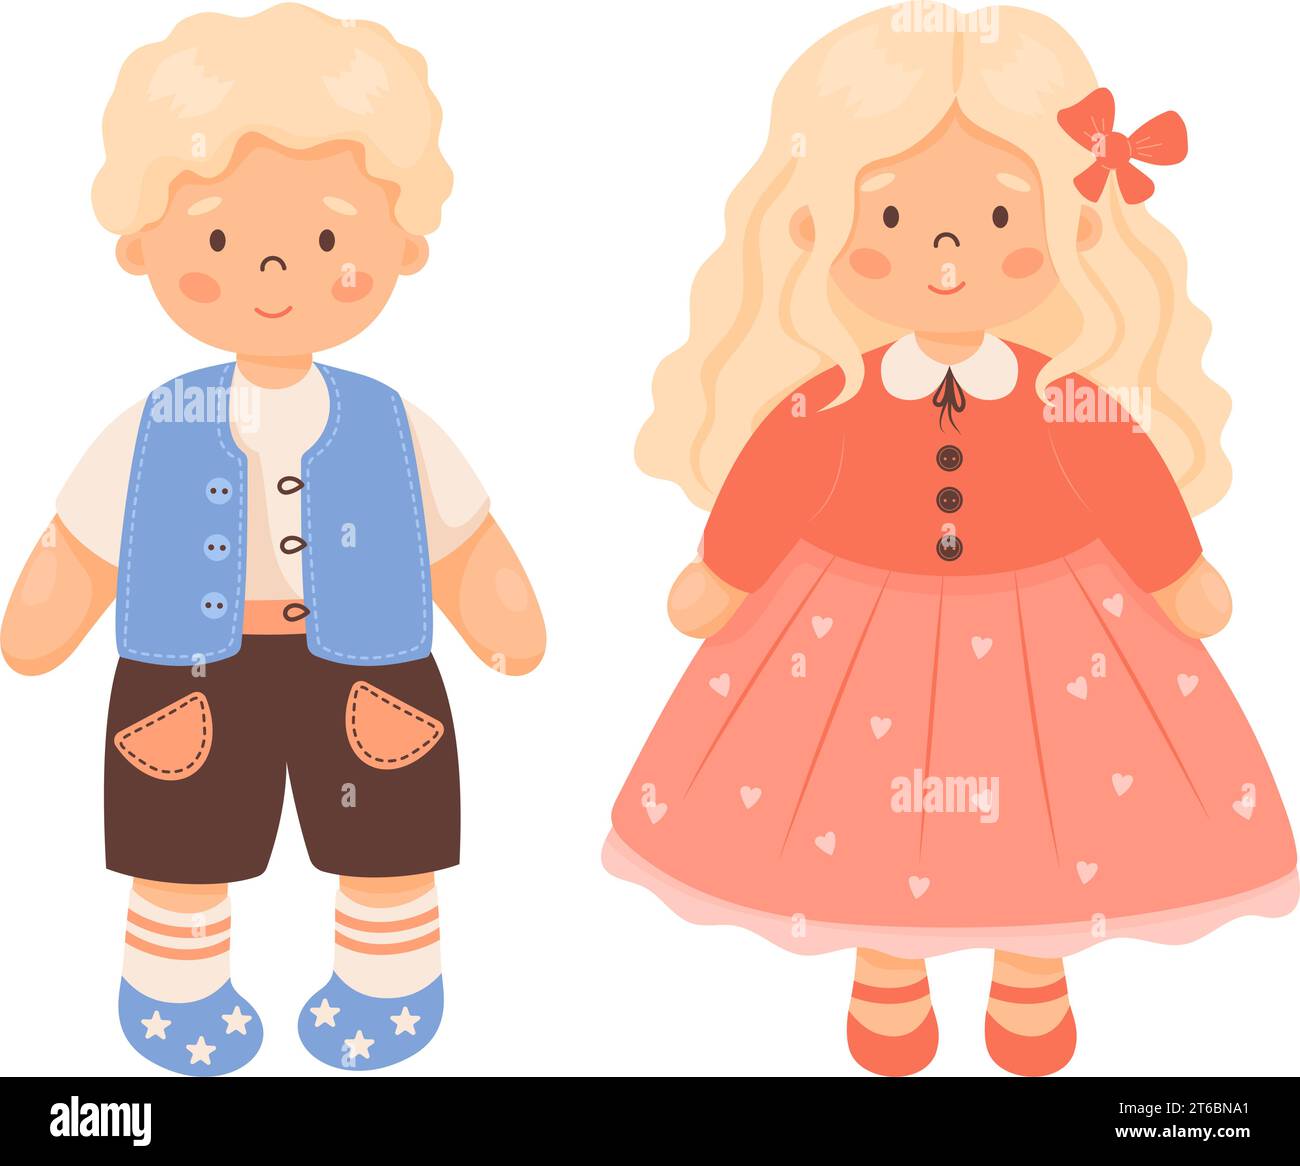 Children toy doll. Cute pair of blond baby. Curly girl with long hair in red dress and boy in vest and shorts. Vector illustration in cartoon style. I Stock Vector